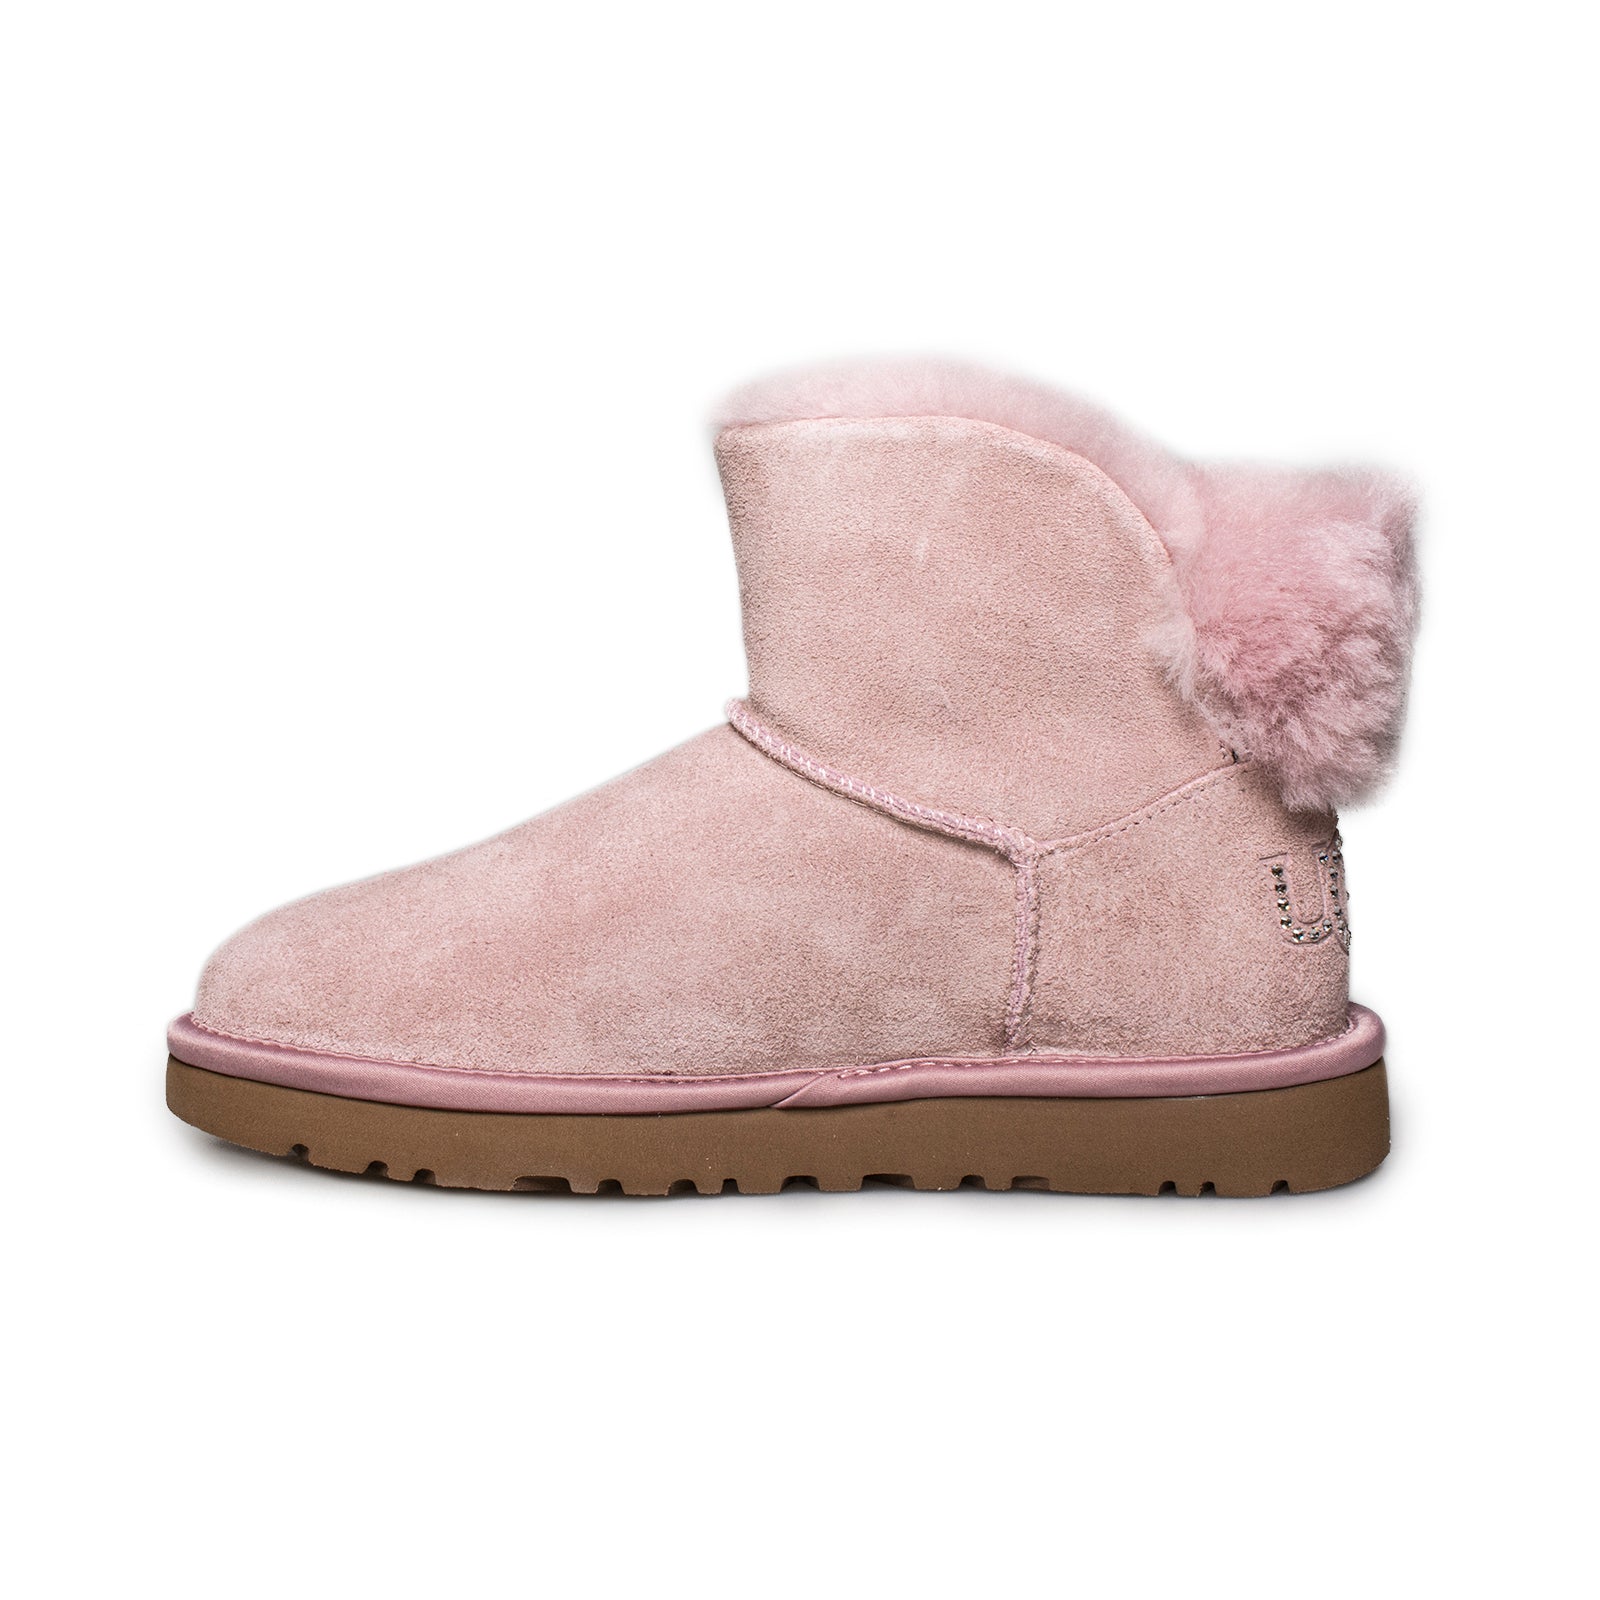 Pink Gucci Ugg boots for Sale in St. Cloud, MN - OfferUp